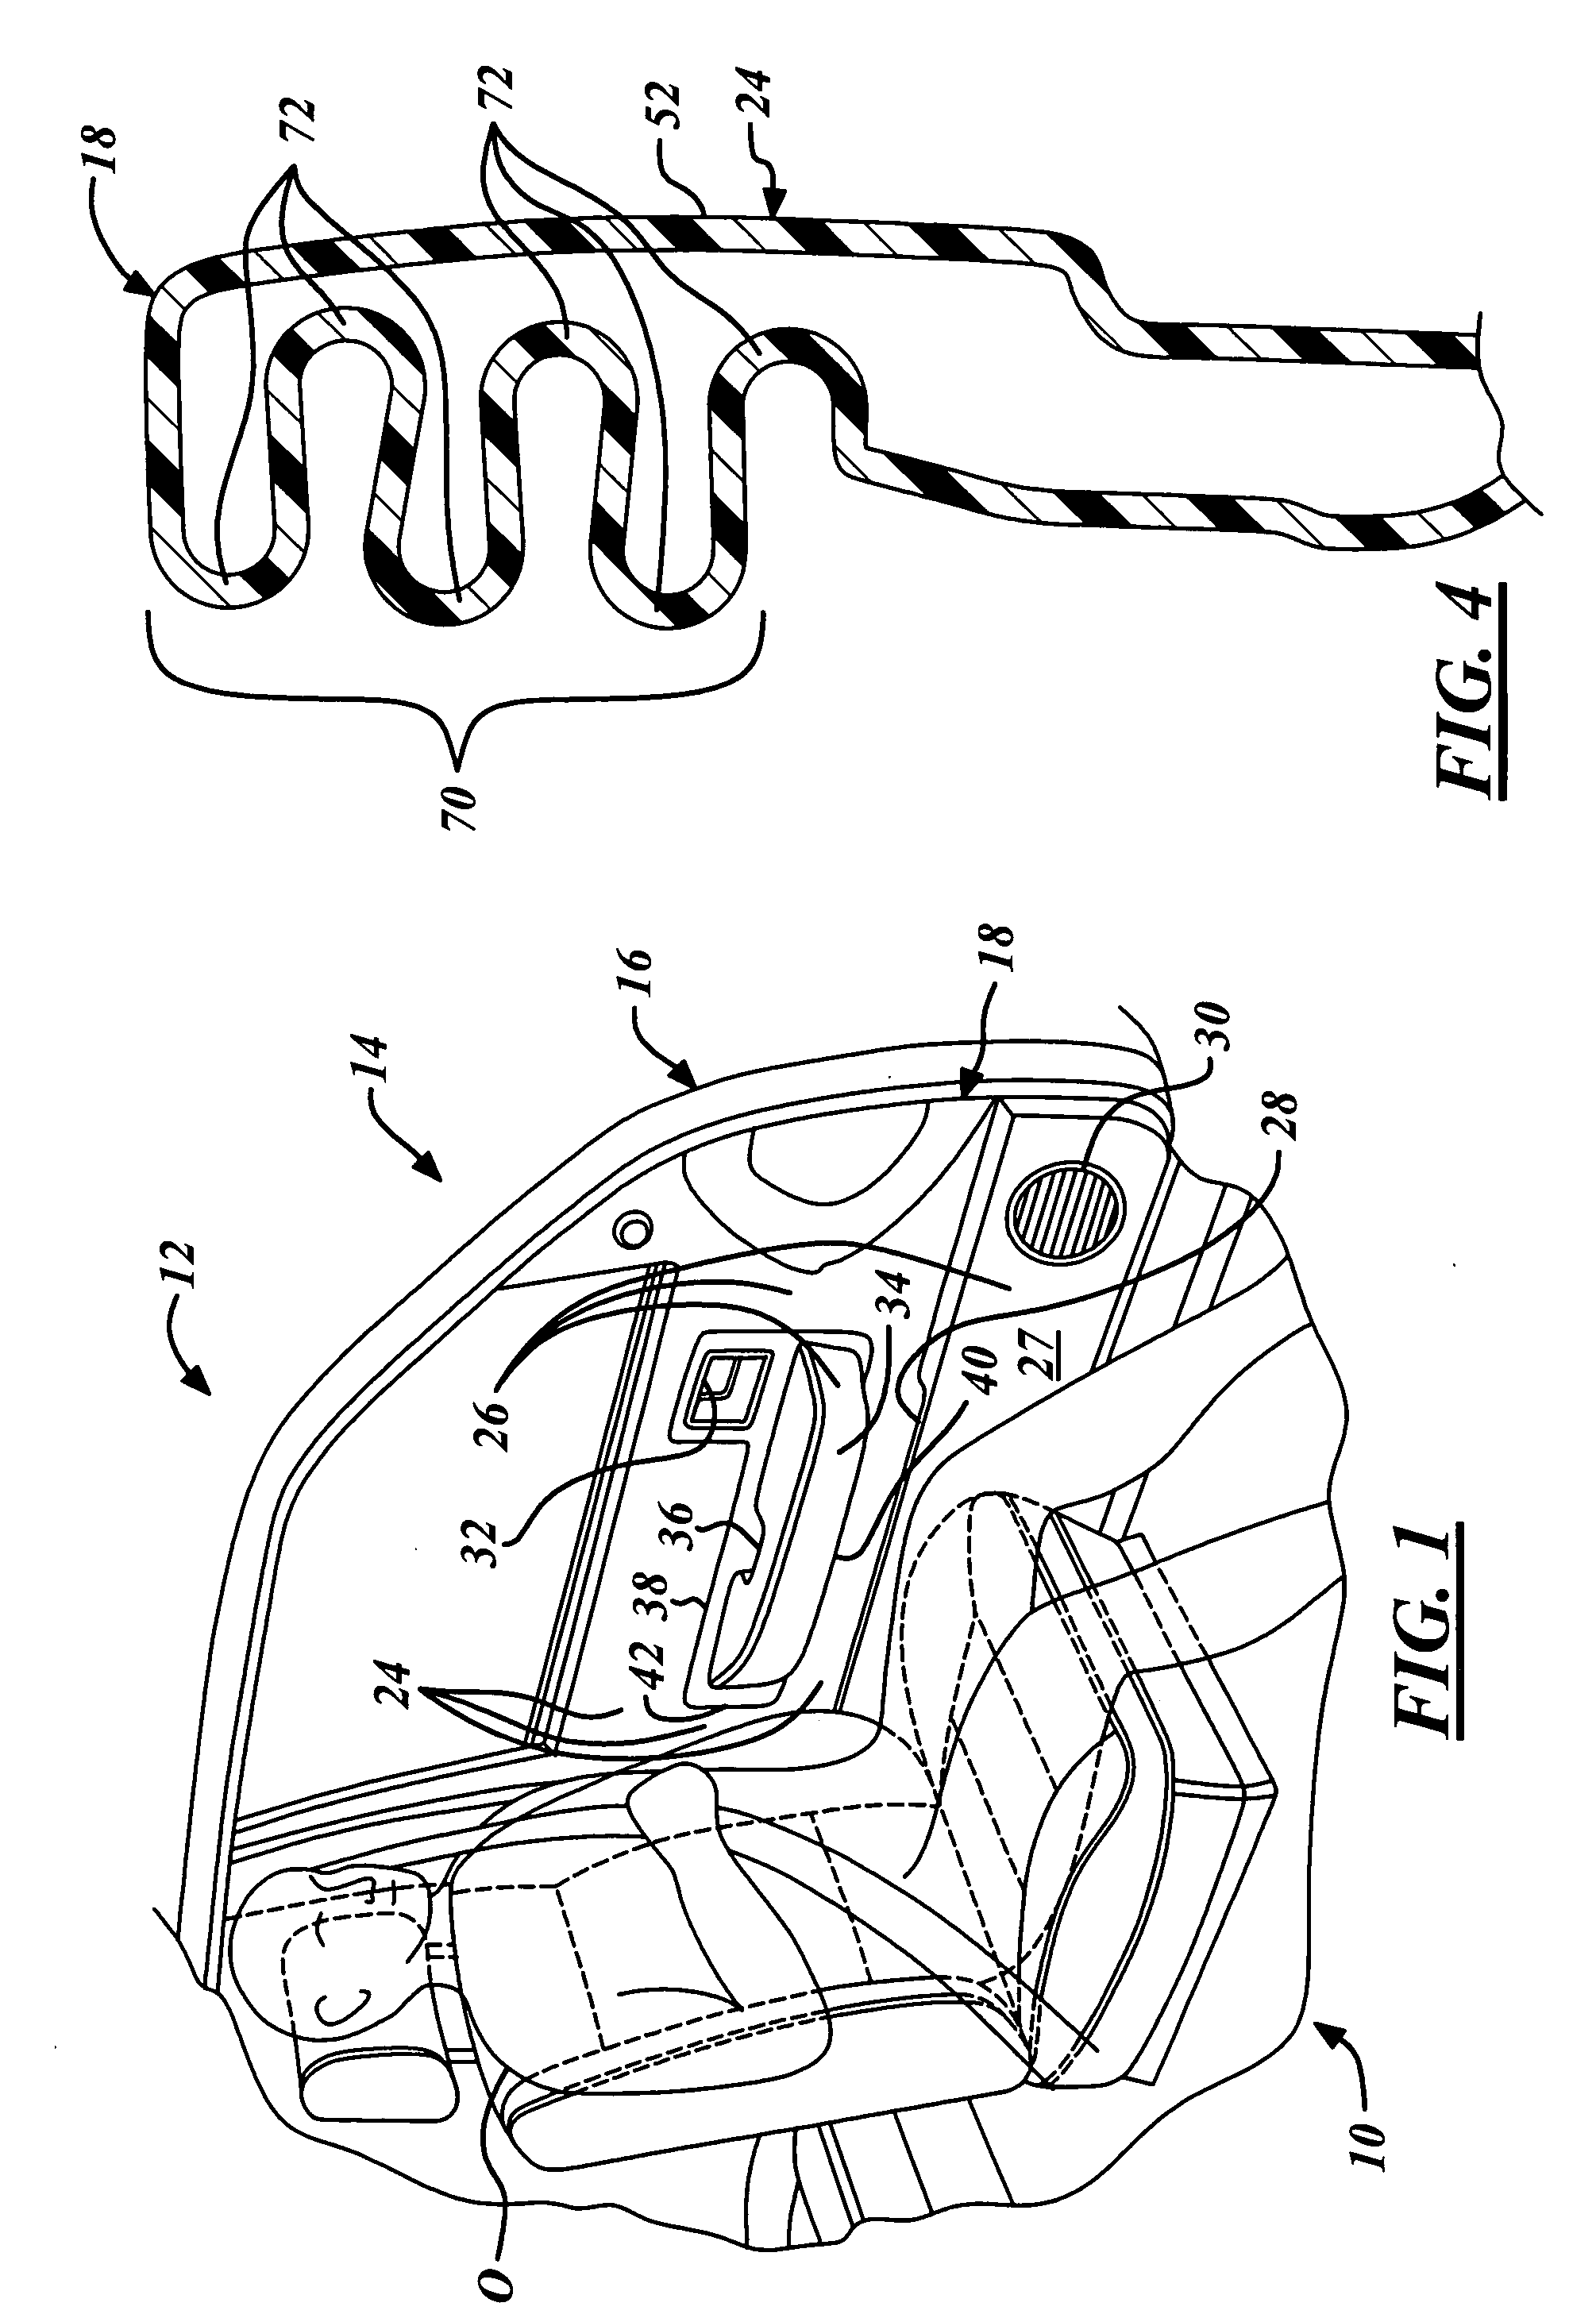 Inflatable interior panel for a vehicle